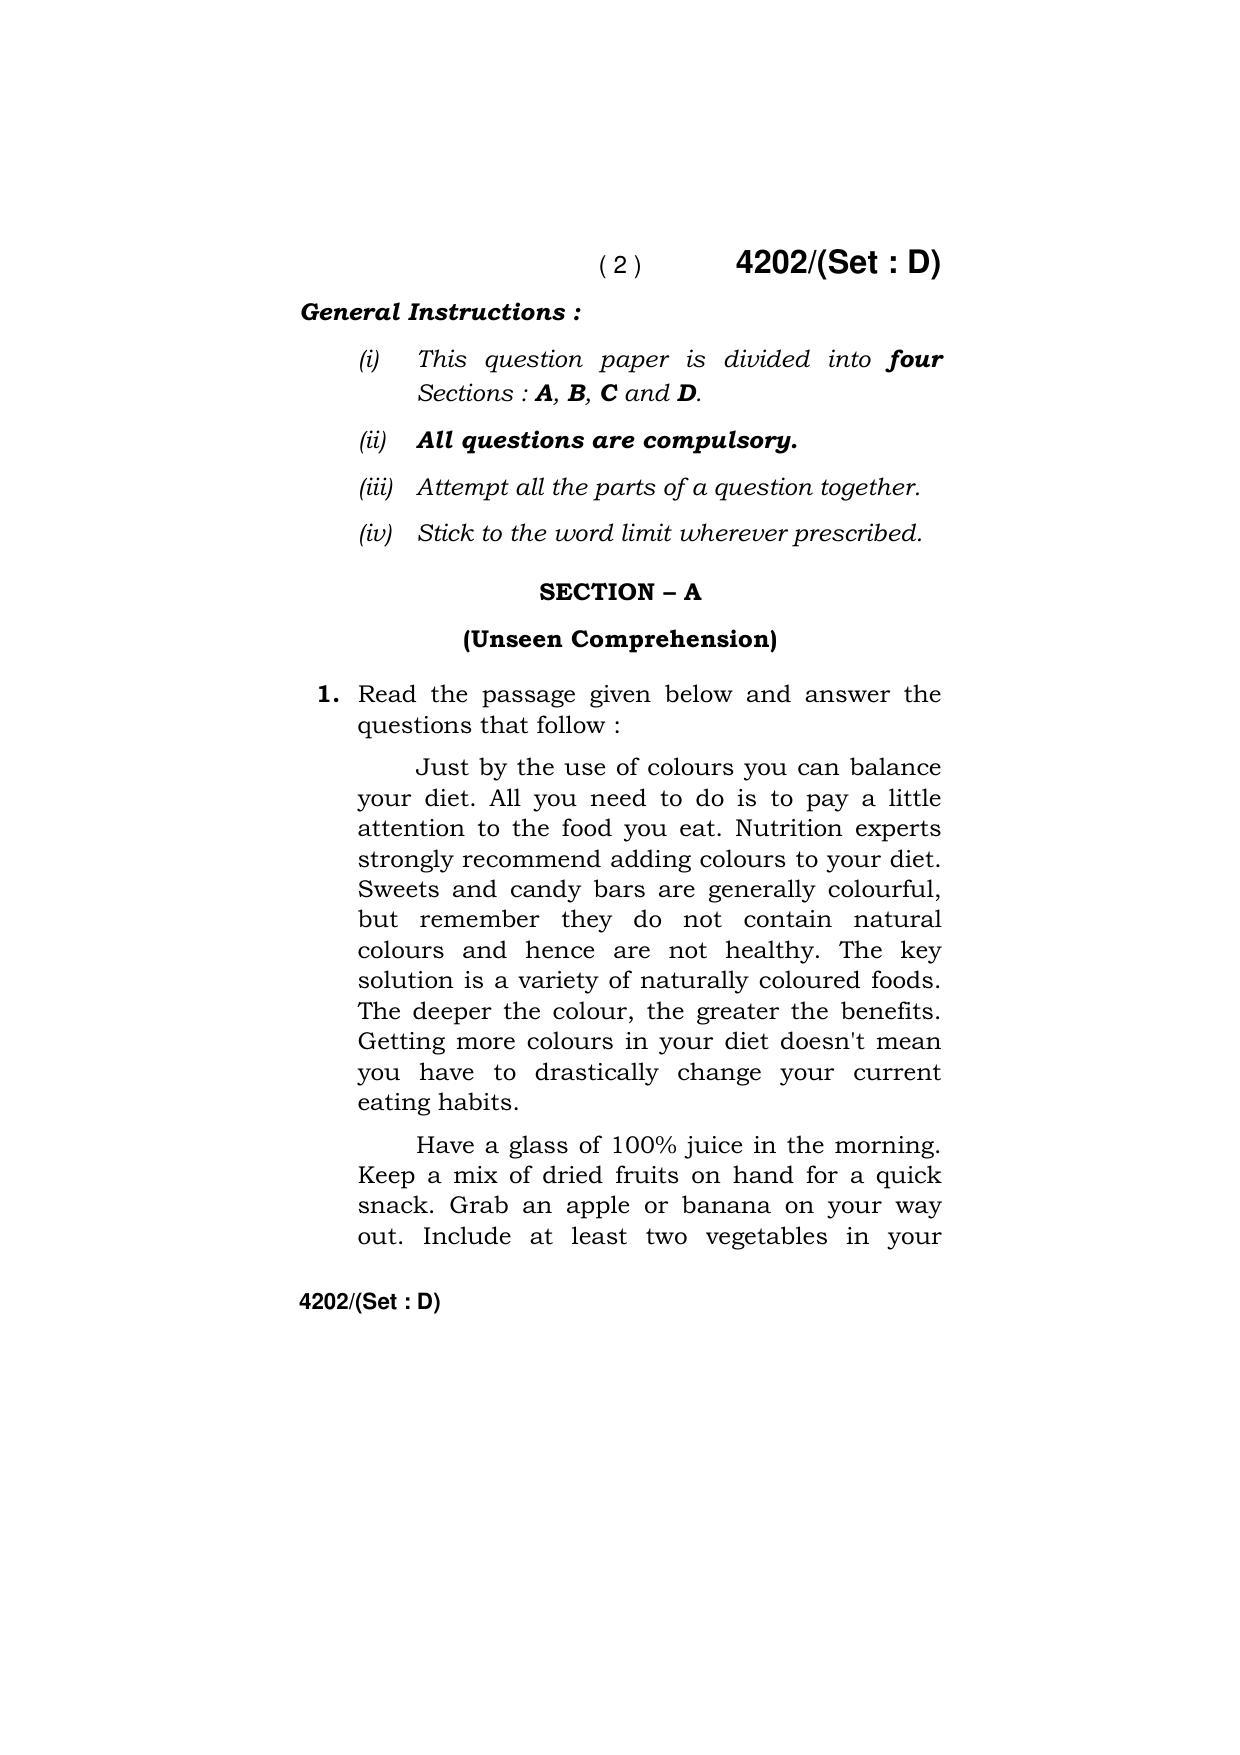 Haryana Board HBSE Class 10 English (All Set) 2019 Question Paper - Page 50